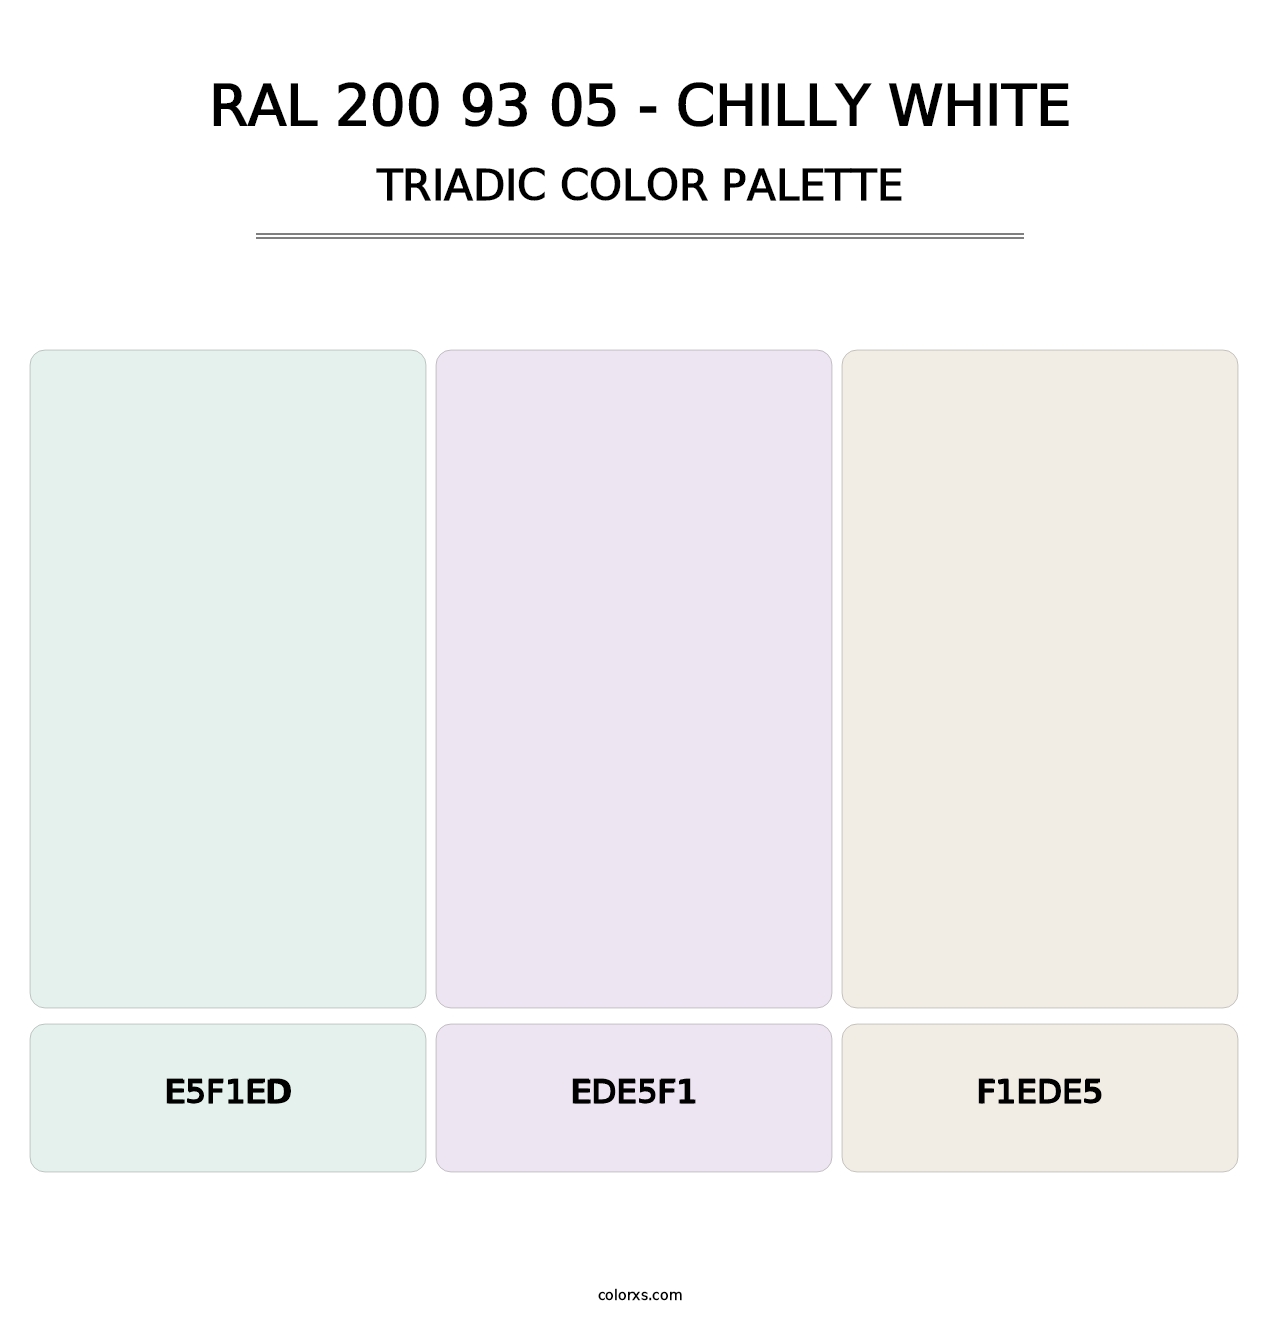 RAL 200 93 05 - Chilly White - Triadic Color Palette